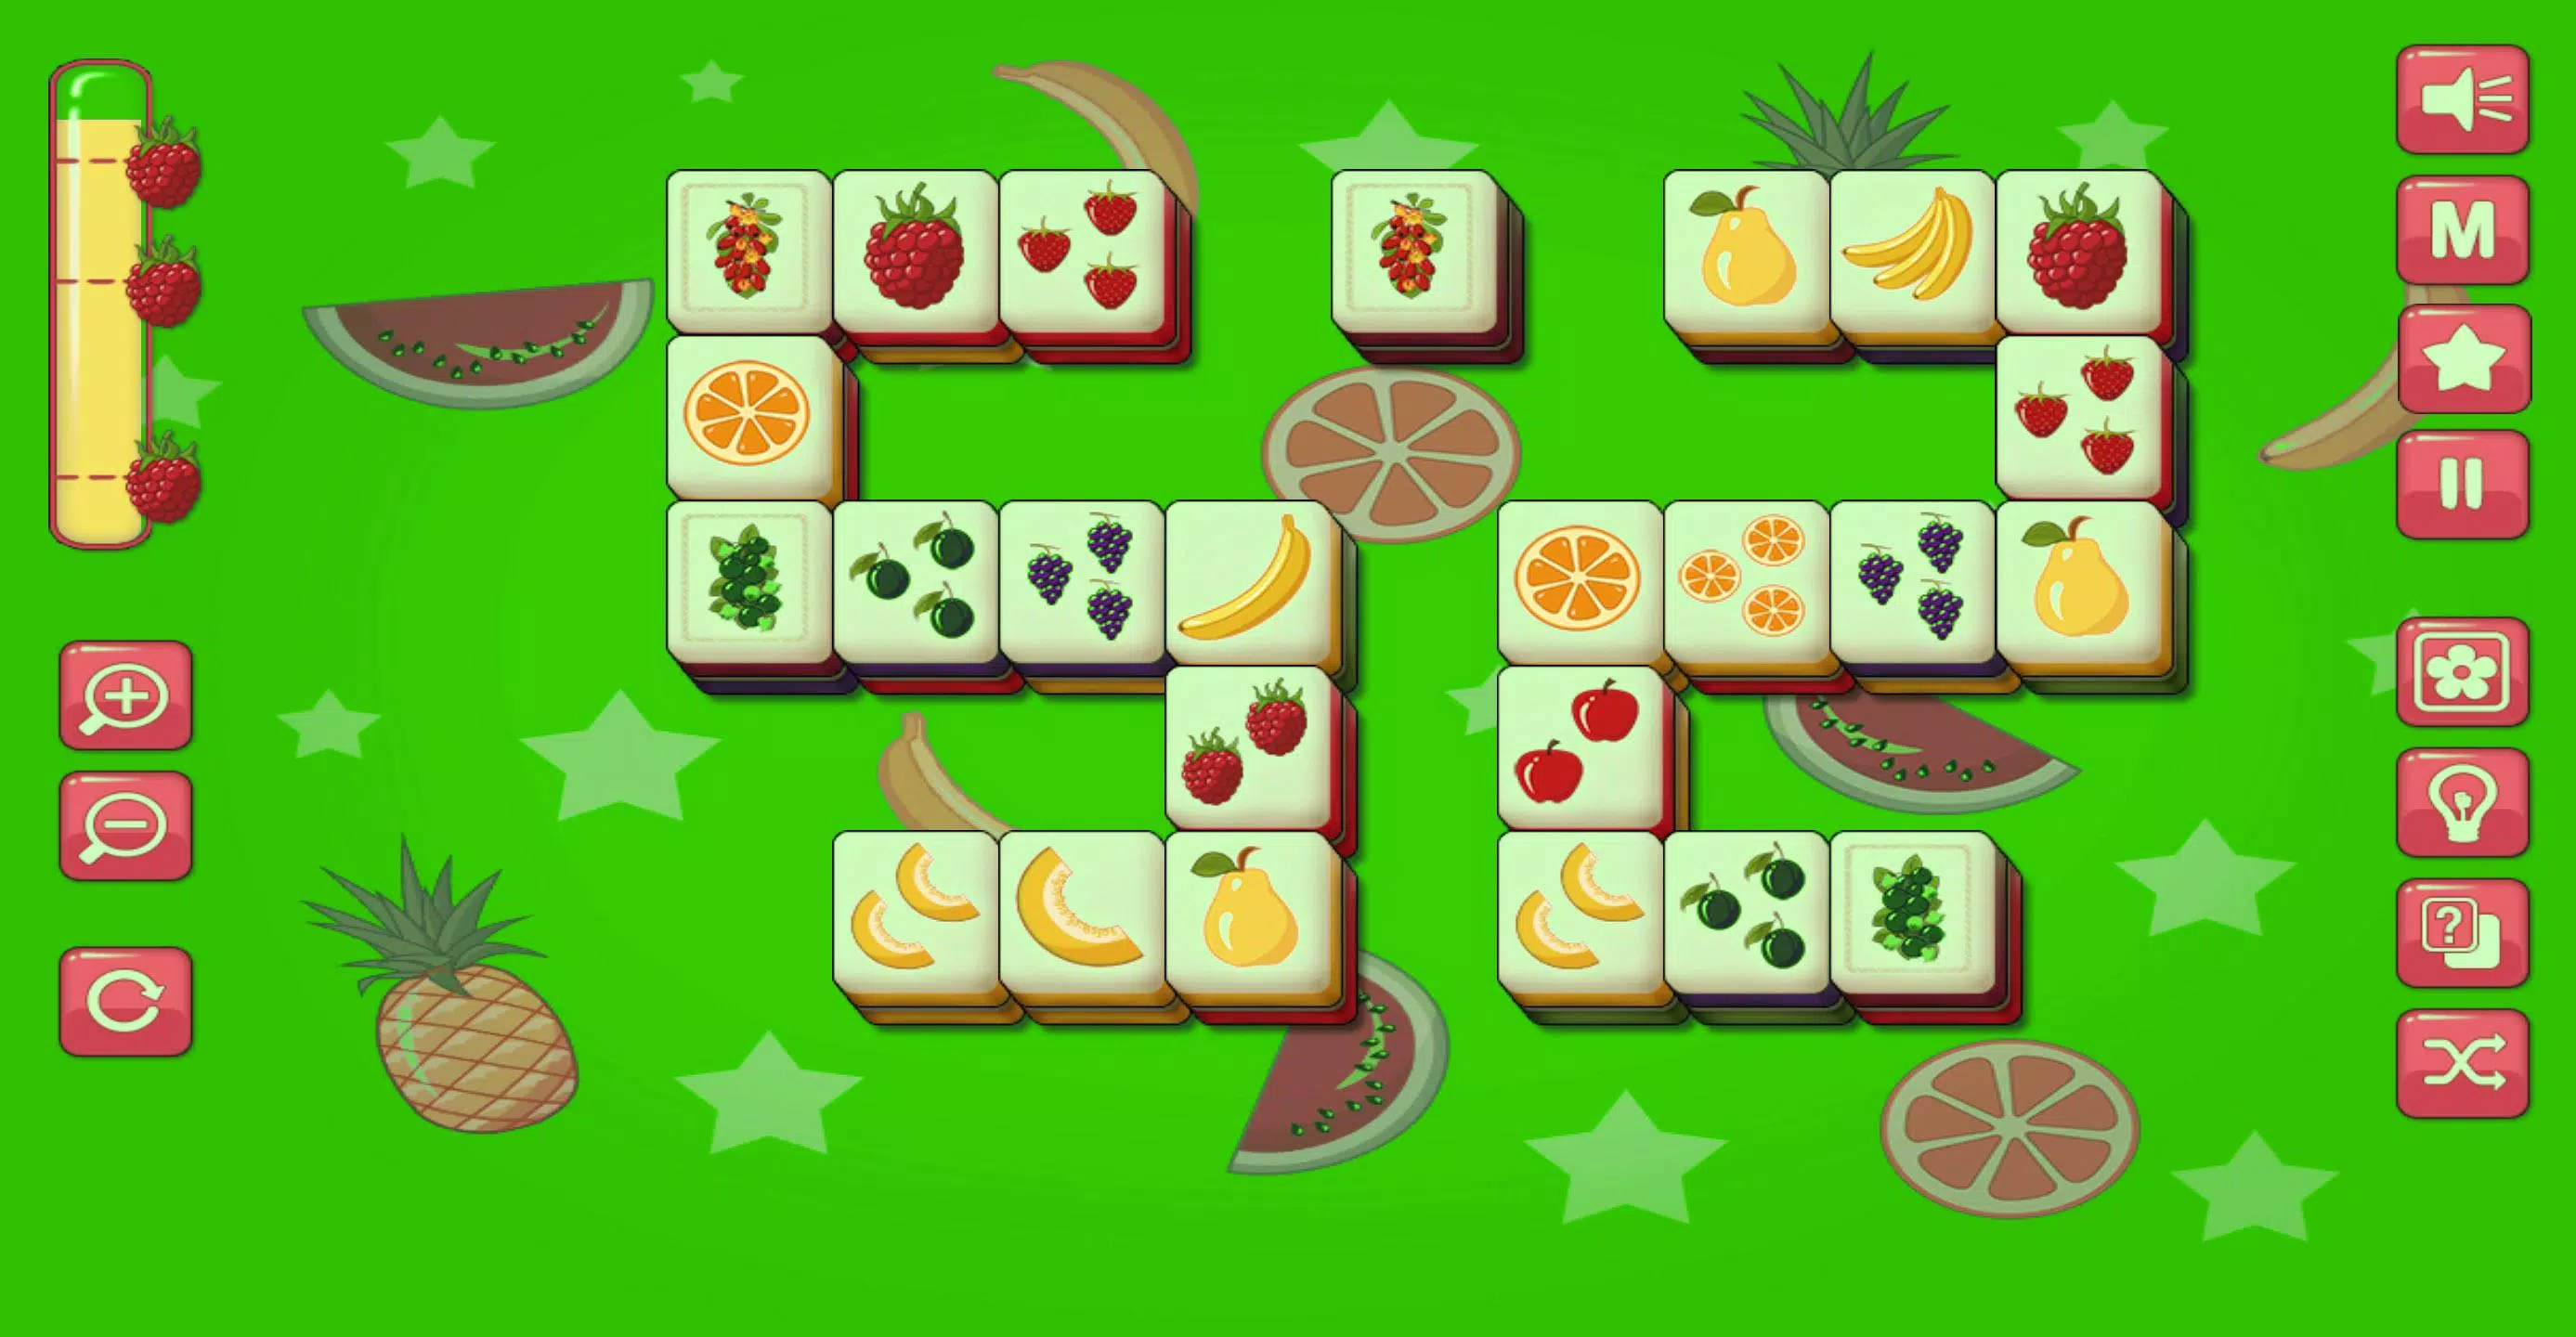 Fruit Mahjong - Online Game - Play for Free